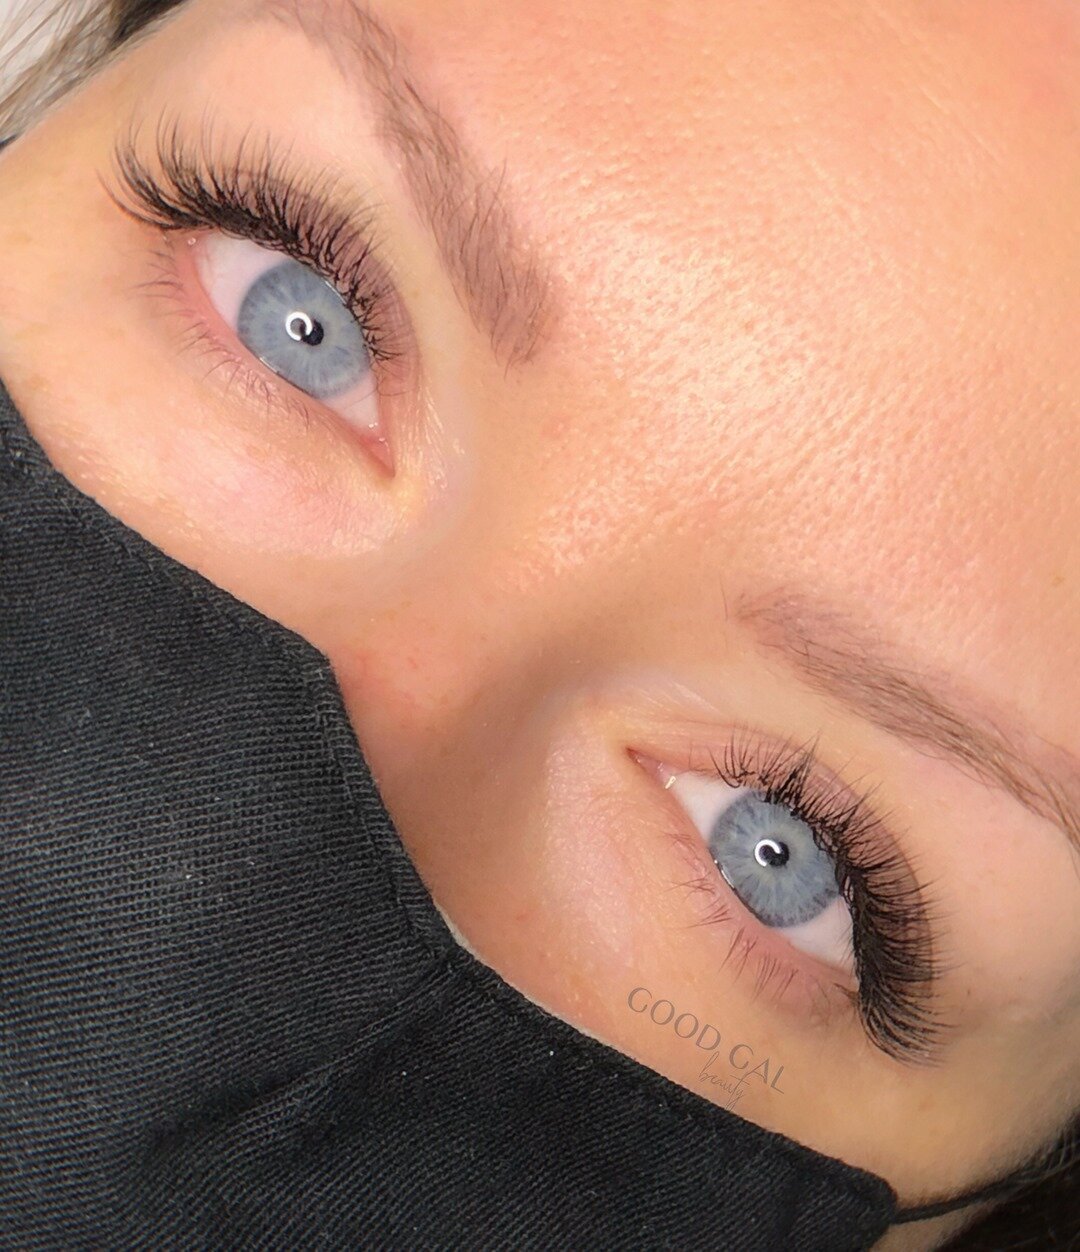 ✨Bright blue eyes with a hint of fluff. ⠀⠀⠀⠀⠀⠀⠀⠀⠀
Another favorite hybrid wispy cat eye style. ⠀⠀⠀⠀⠀⠀⠀⠀⠀
⠀⠀⠀⠀⠀⠀⠀⠀⠀
Feel free to reach out anytime at goodgalbeauty.ca ⠀⠀⠀⠀⠀⠀⠀⠀⠀
⠀⠀⠀⠀⠀⠀⠀⠀⠀
⠀⠀⠀⠀⠀⠀⠀⠀⠀
--------------------------------------------⠀⠀⠀⠀⠀⠀⠀⠀⠀
